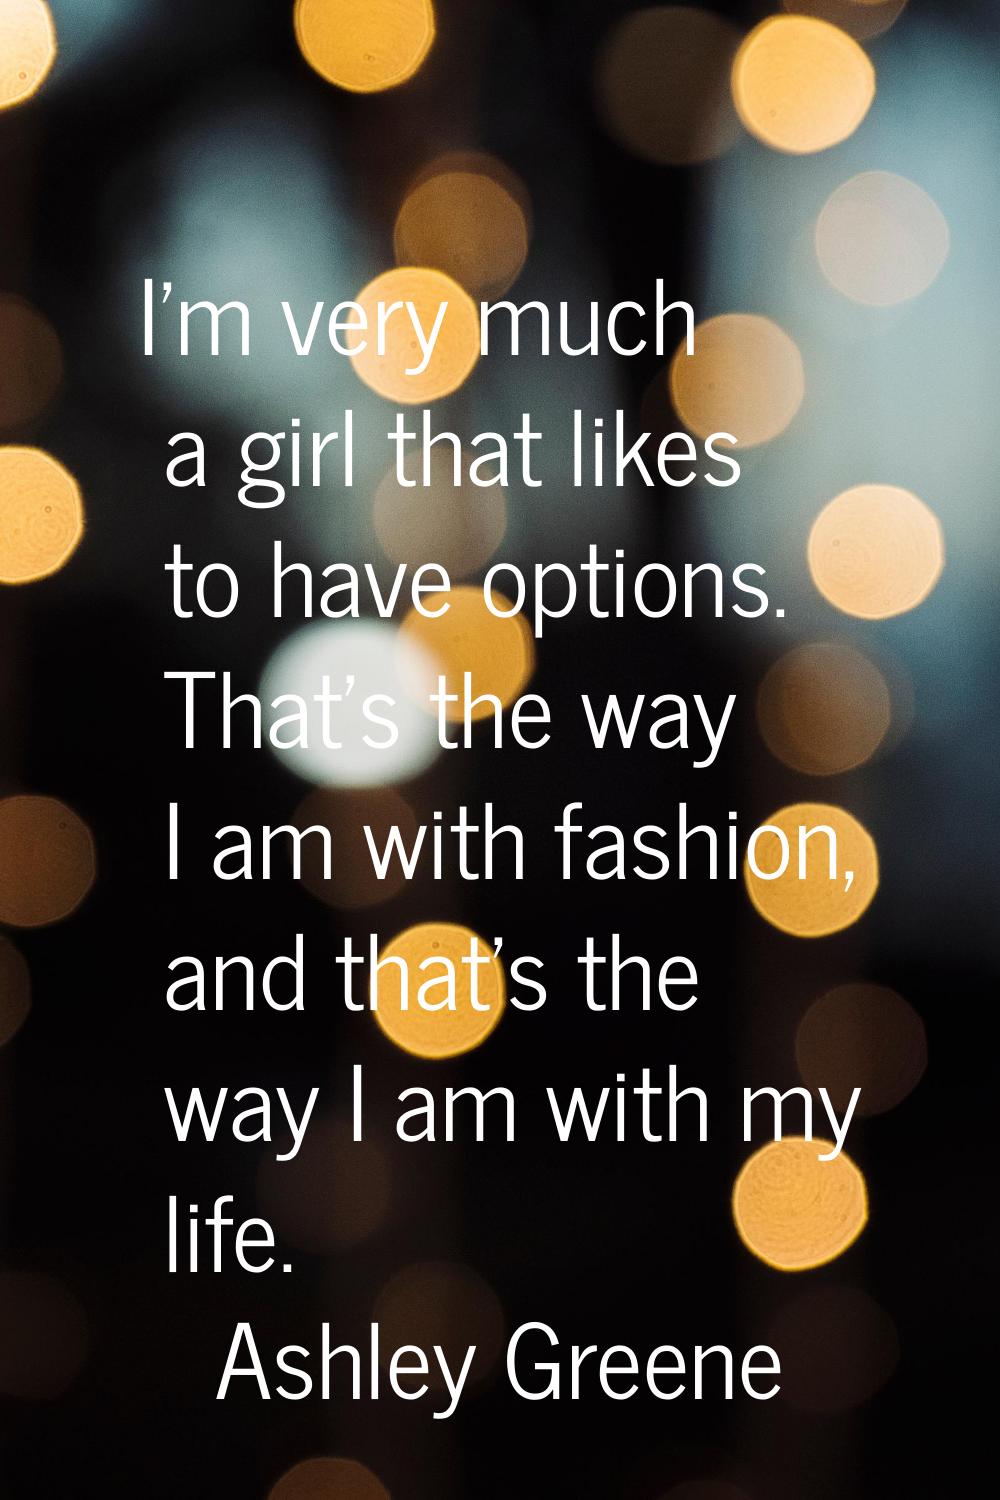 I'm very much a girl that likes to have options. That's the way I am with fashion, and that's the w